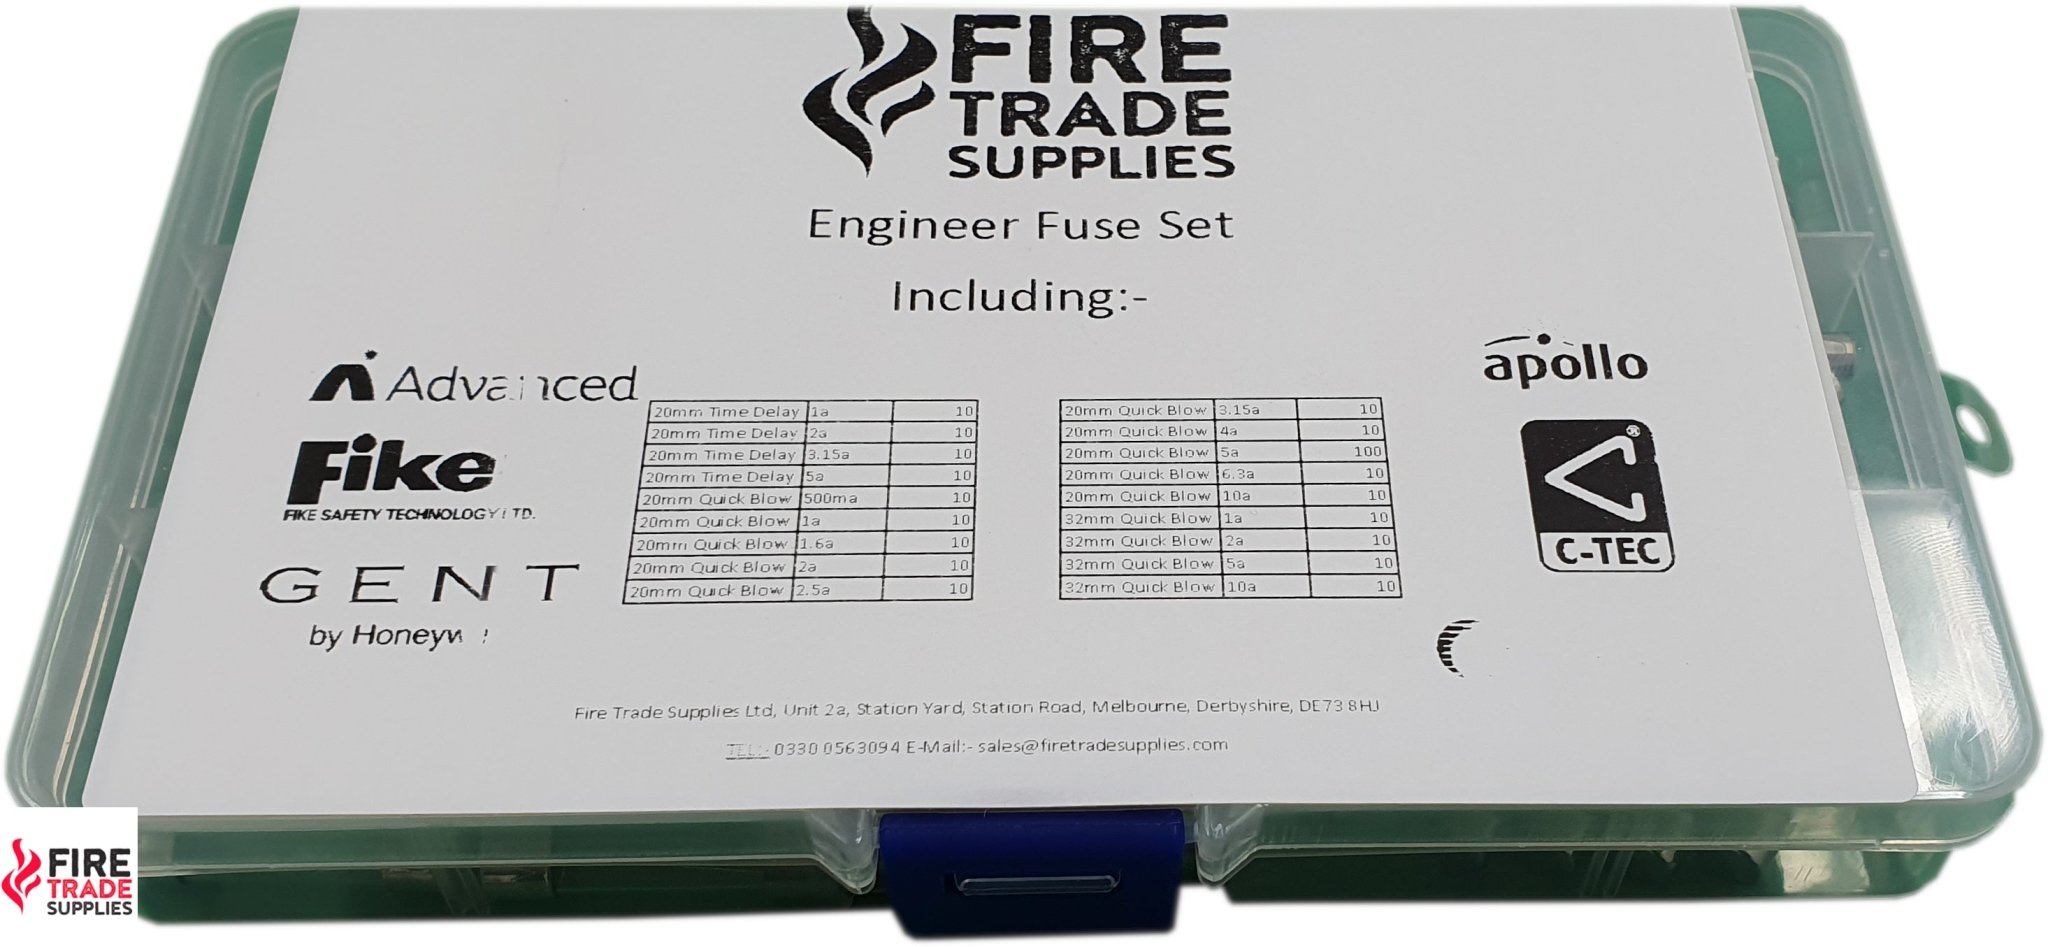 Engineer Spare Fuse Set - Fire Trade Supplies